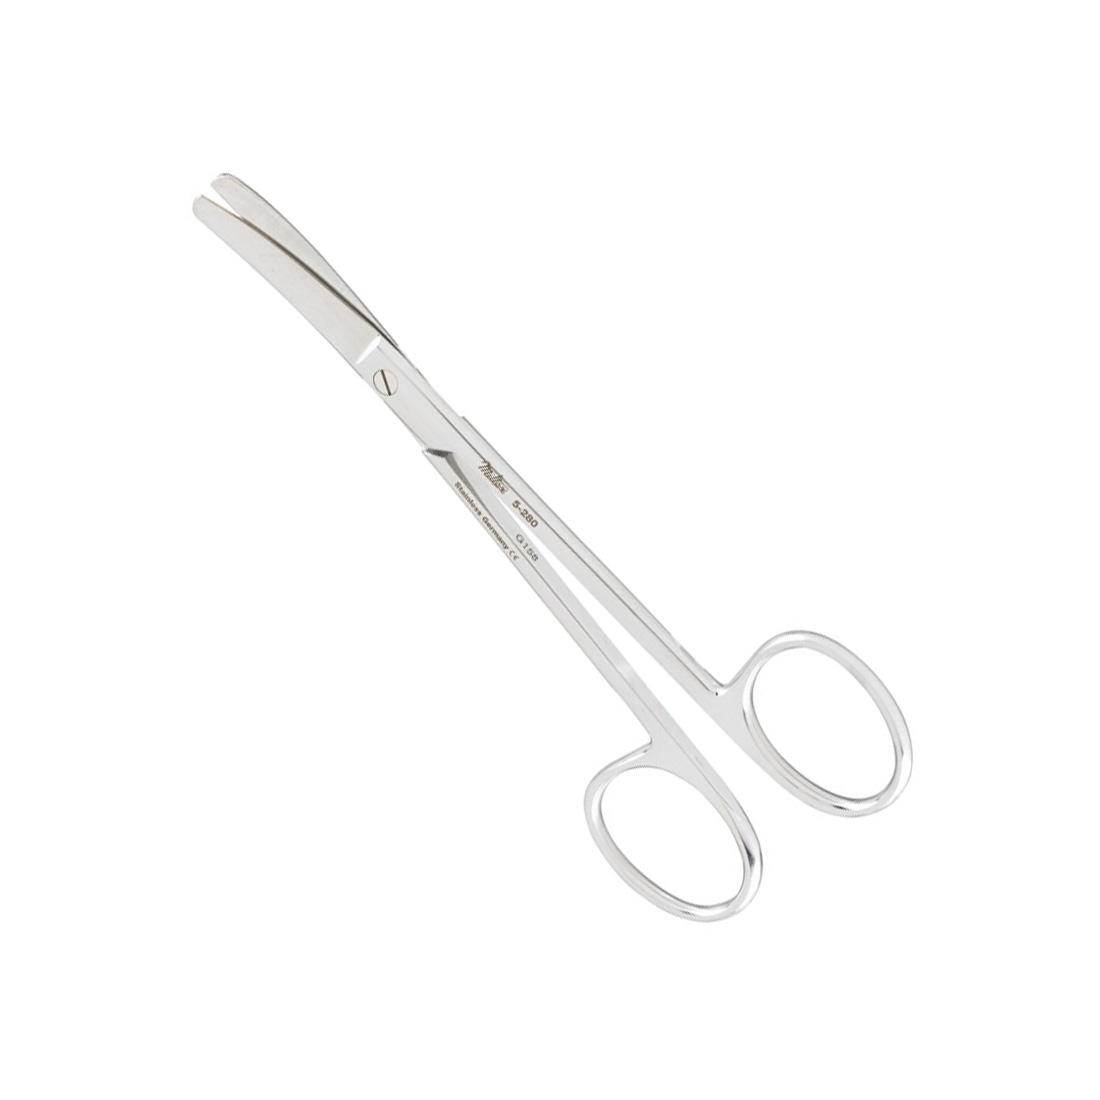 Wagner Plastic Surgery Scissors, Curved,  Blunt-Blunt Points